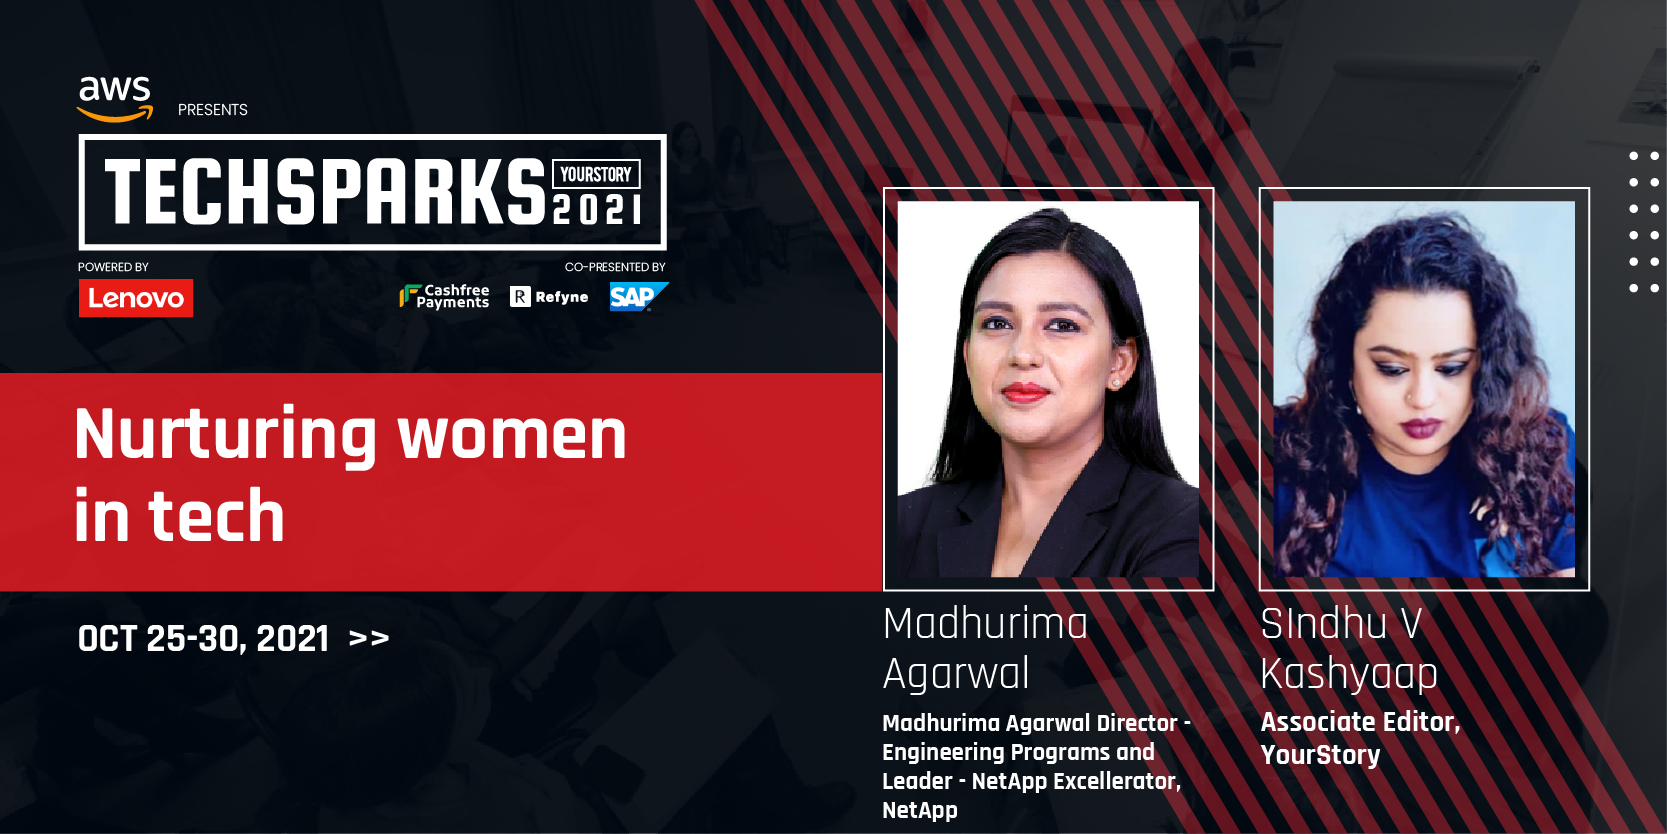 Focus on equity over equality has encouraged more women in STEM: NetApp’s Madhurima Agarwal 